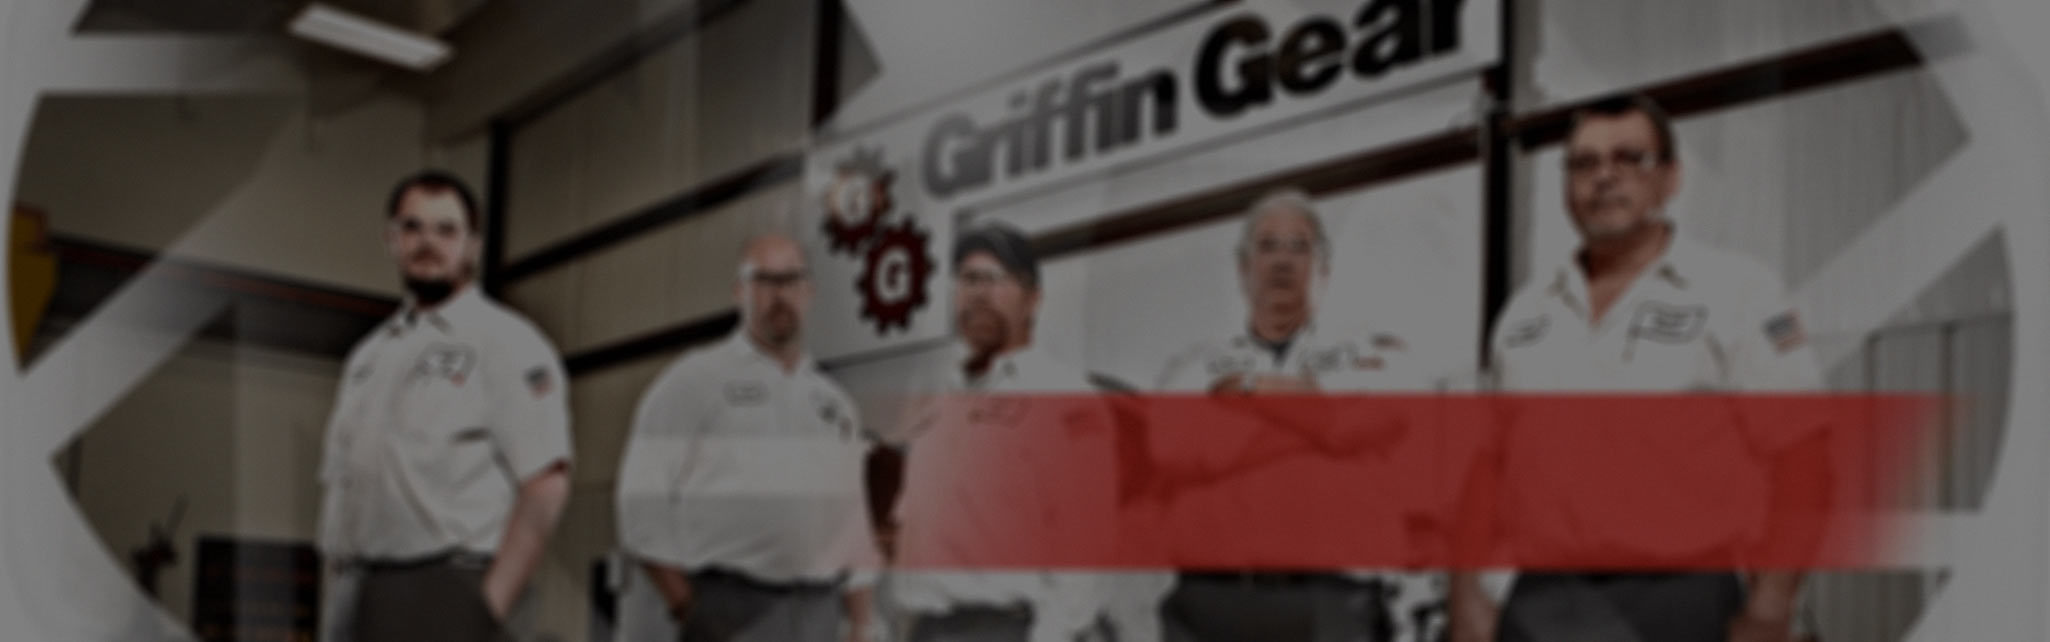 Griffin Gear Offers A Complete Range of Gearing Solutions for the Power Transmission Industry